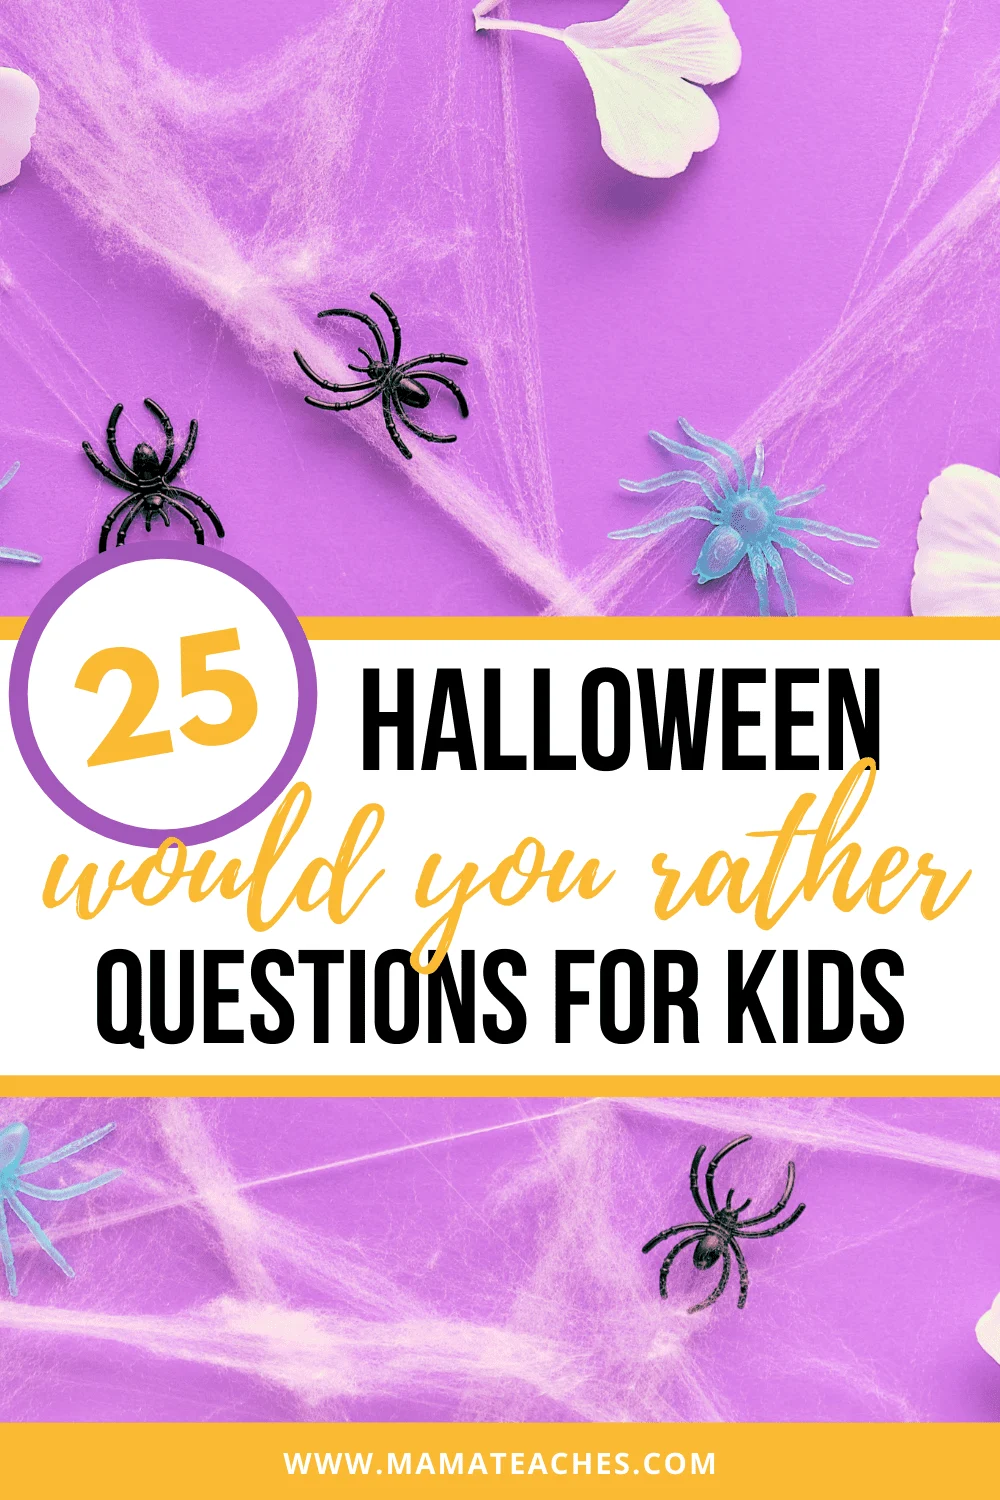 25 Halloween Would You Rather Questions for Kids